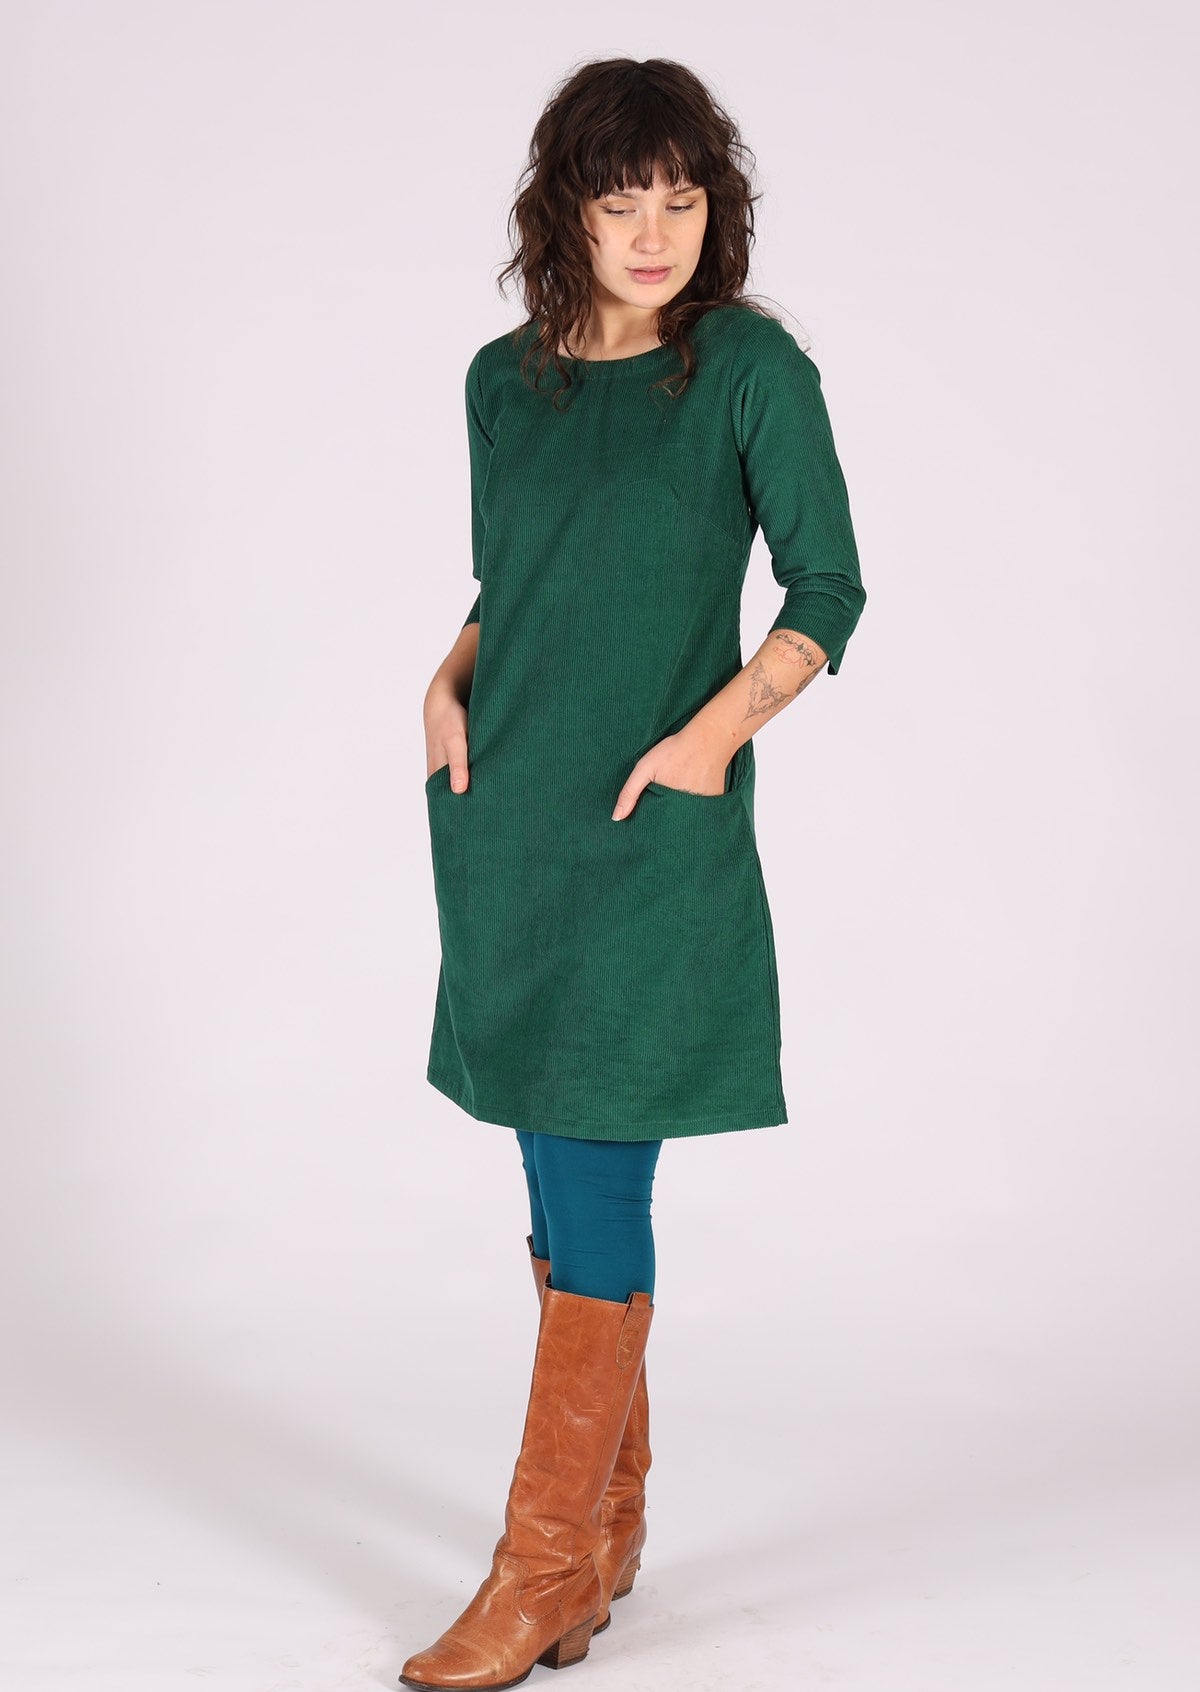 Green corduroy dress with pockets at the front